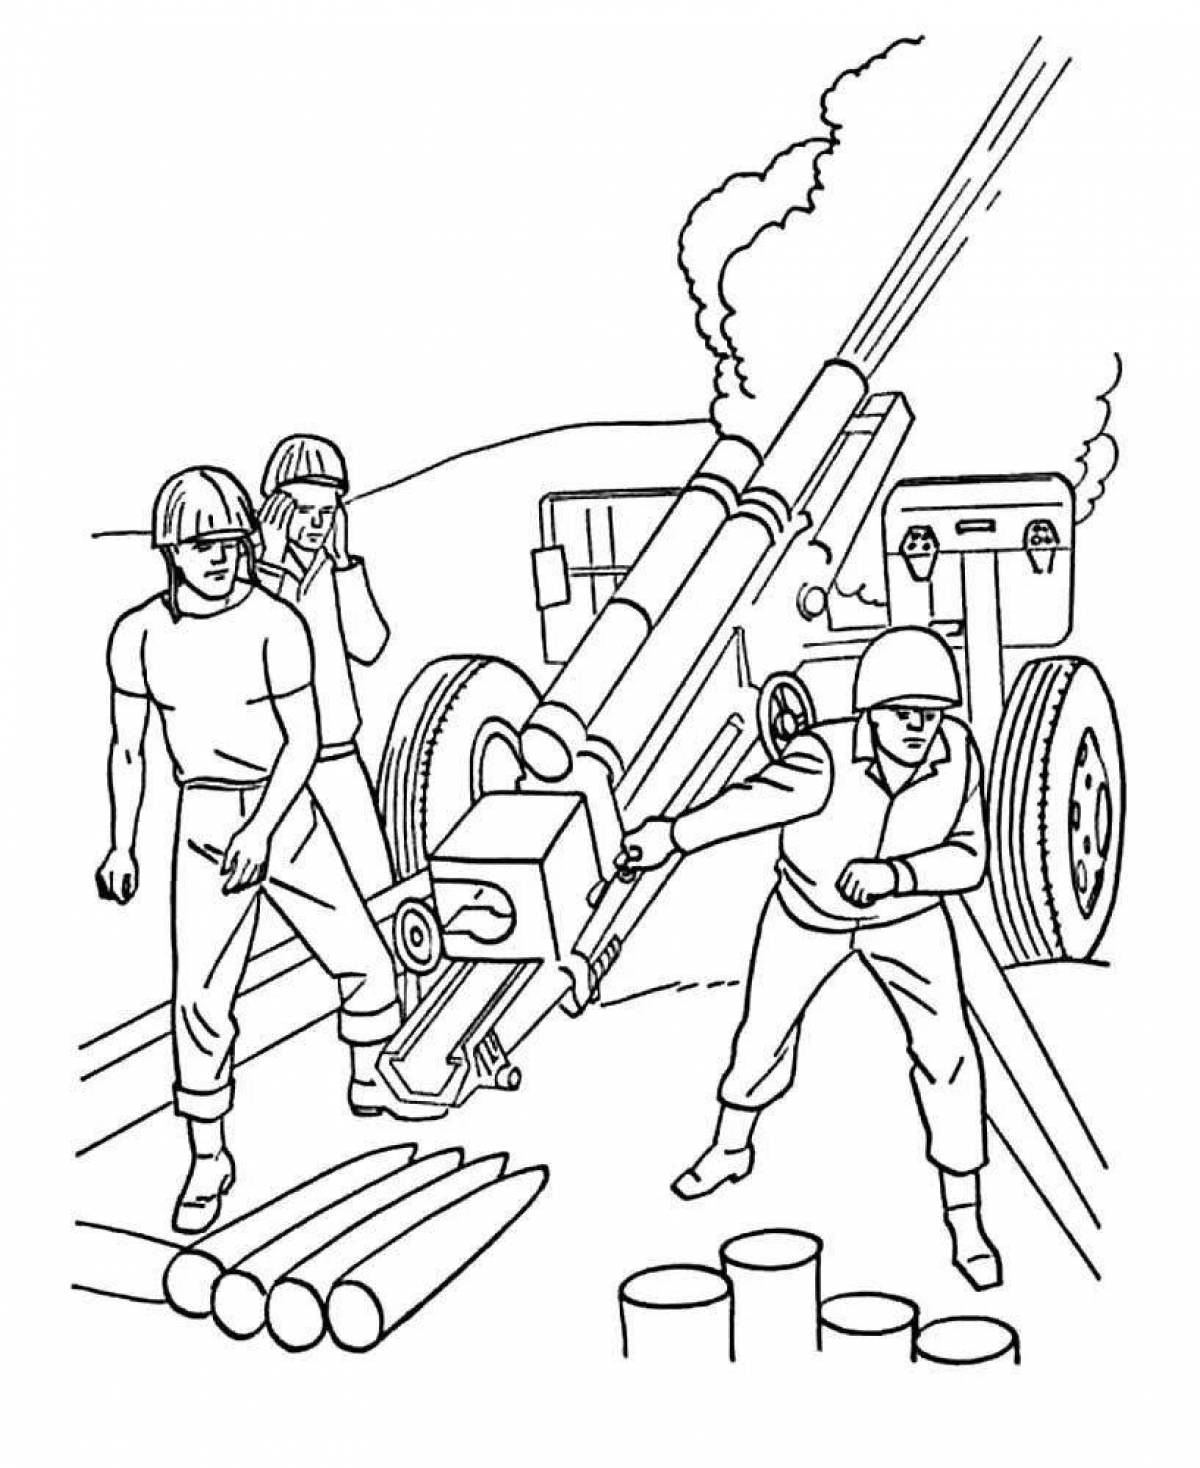 Exquisite war hero coloring pages for kids